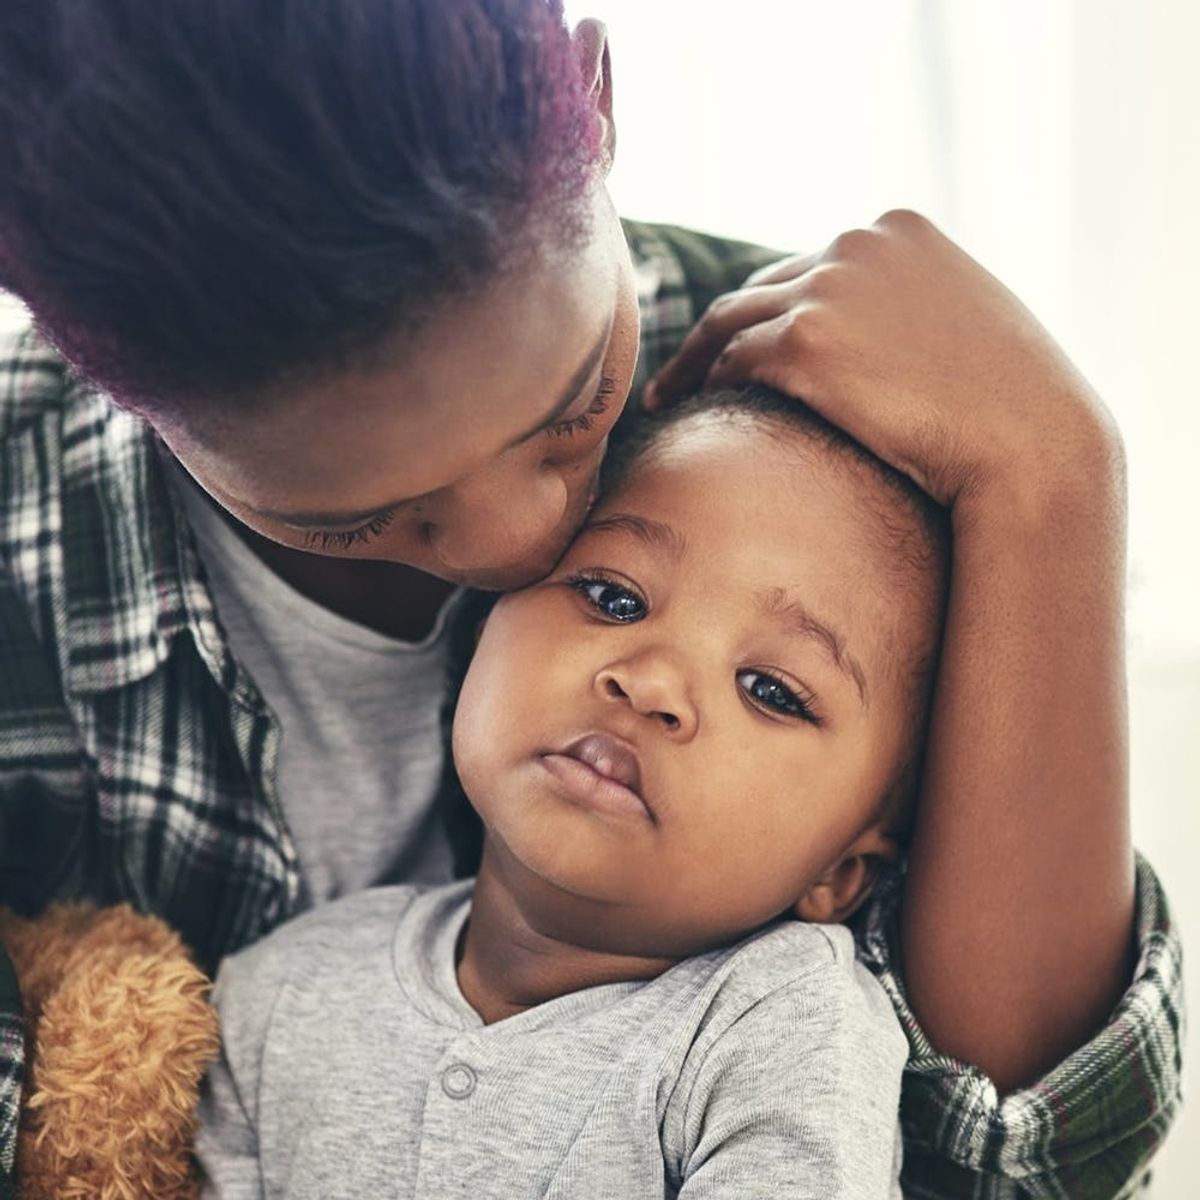 7 Tips  to Help Working Mamas Handle a Last-Minute Kid Sick Day